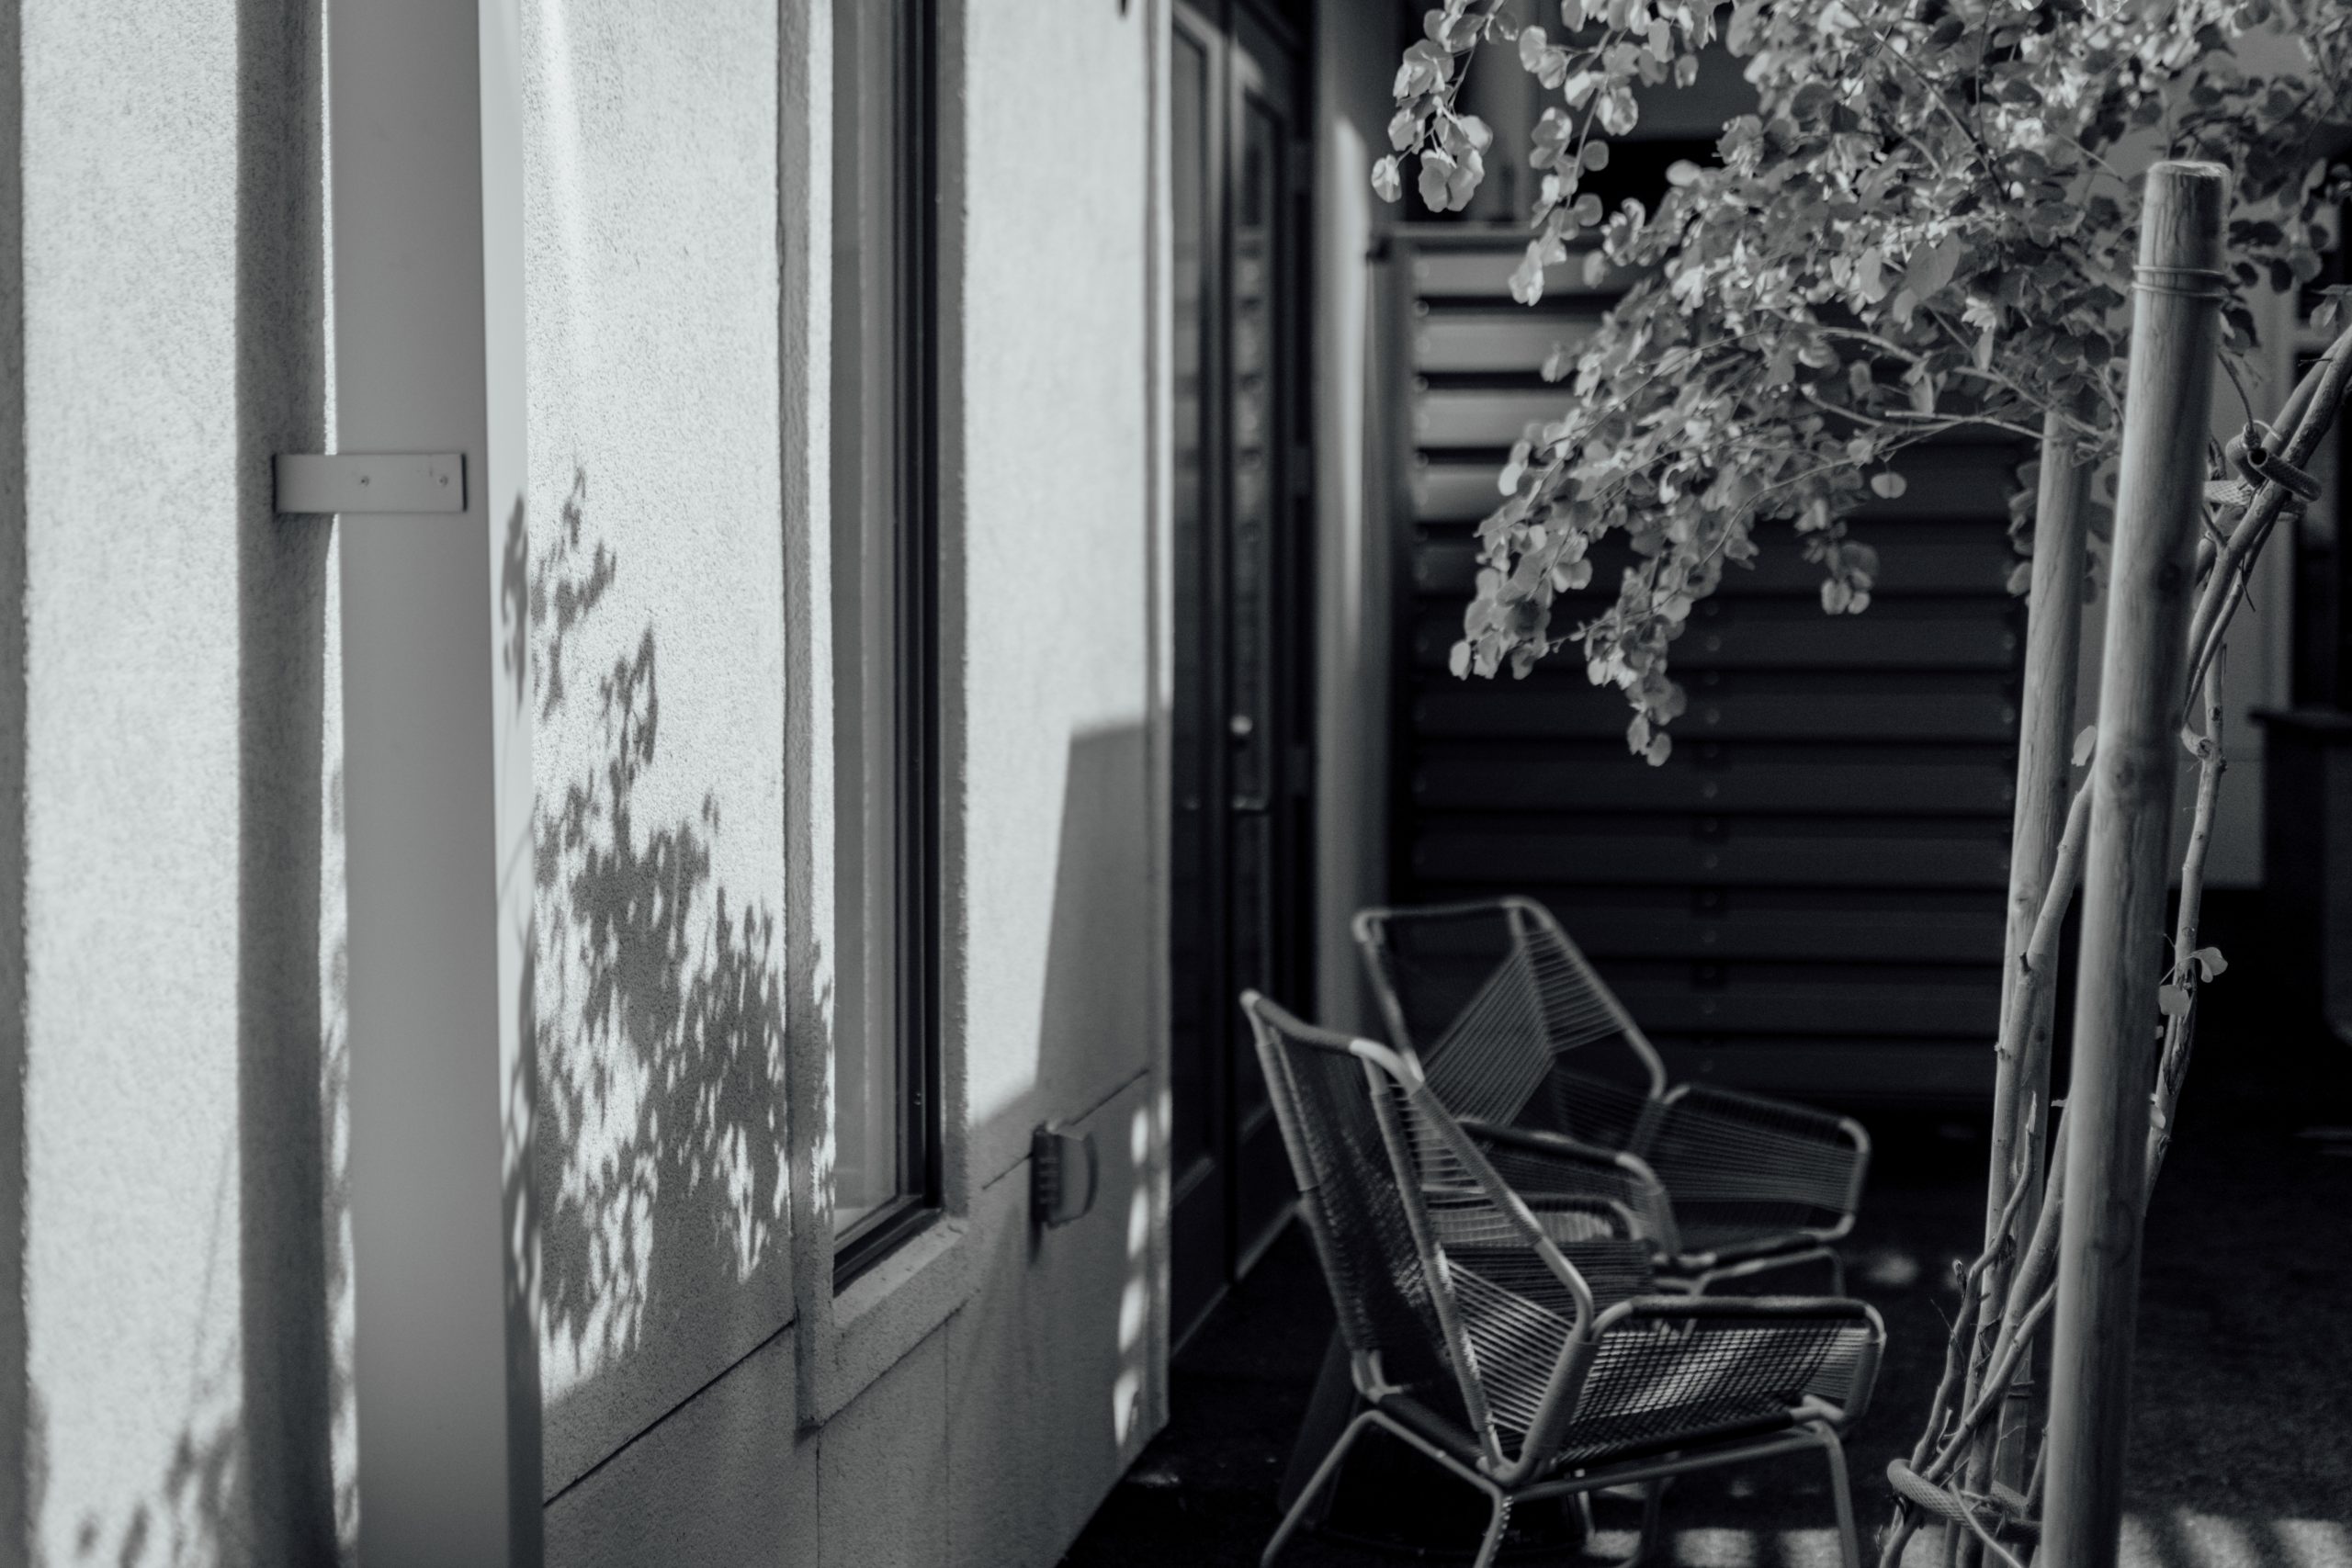 Black and white photo of patio furniture.